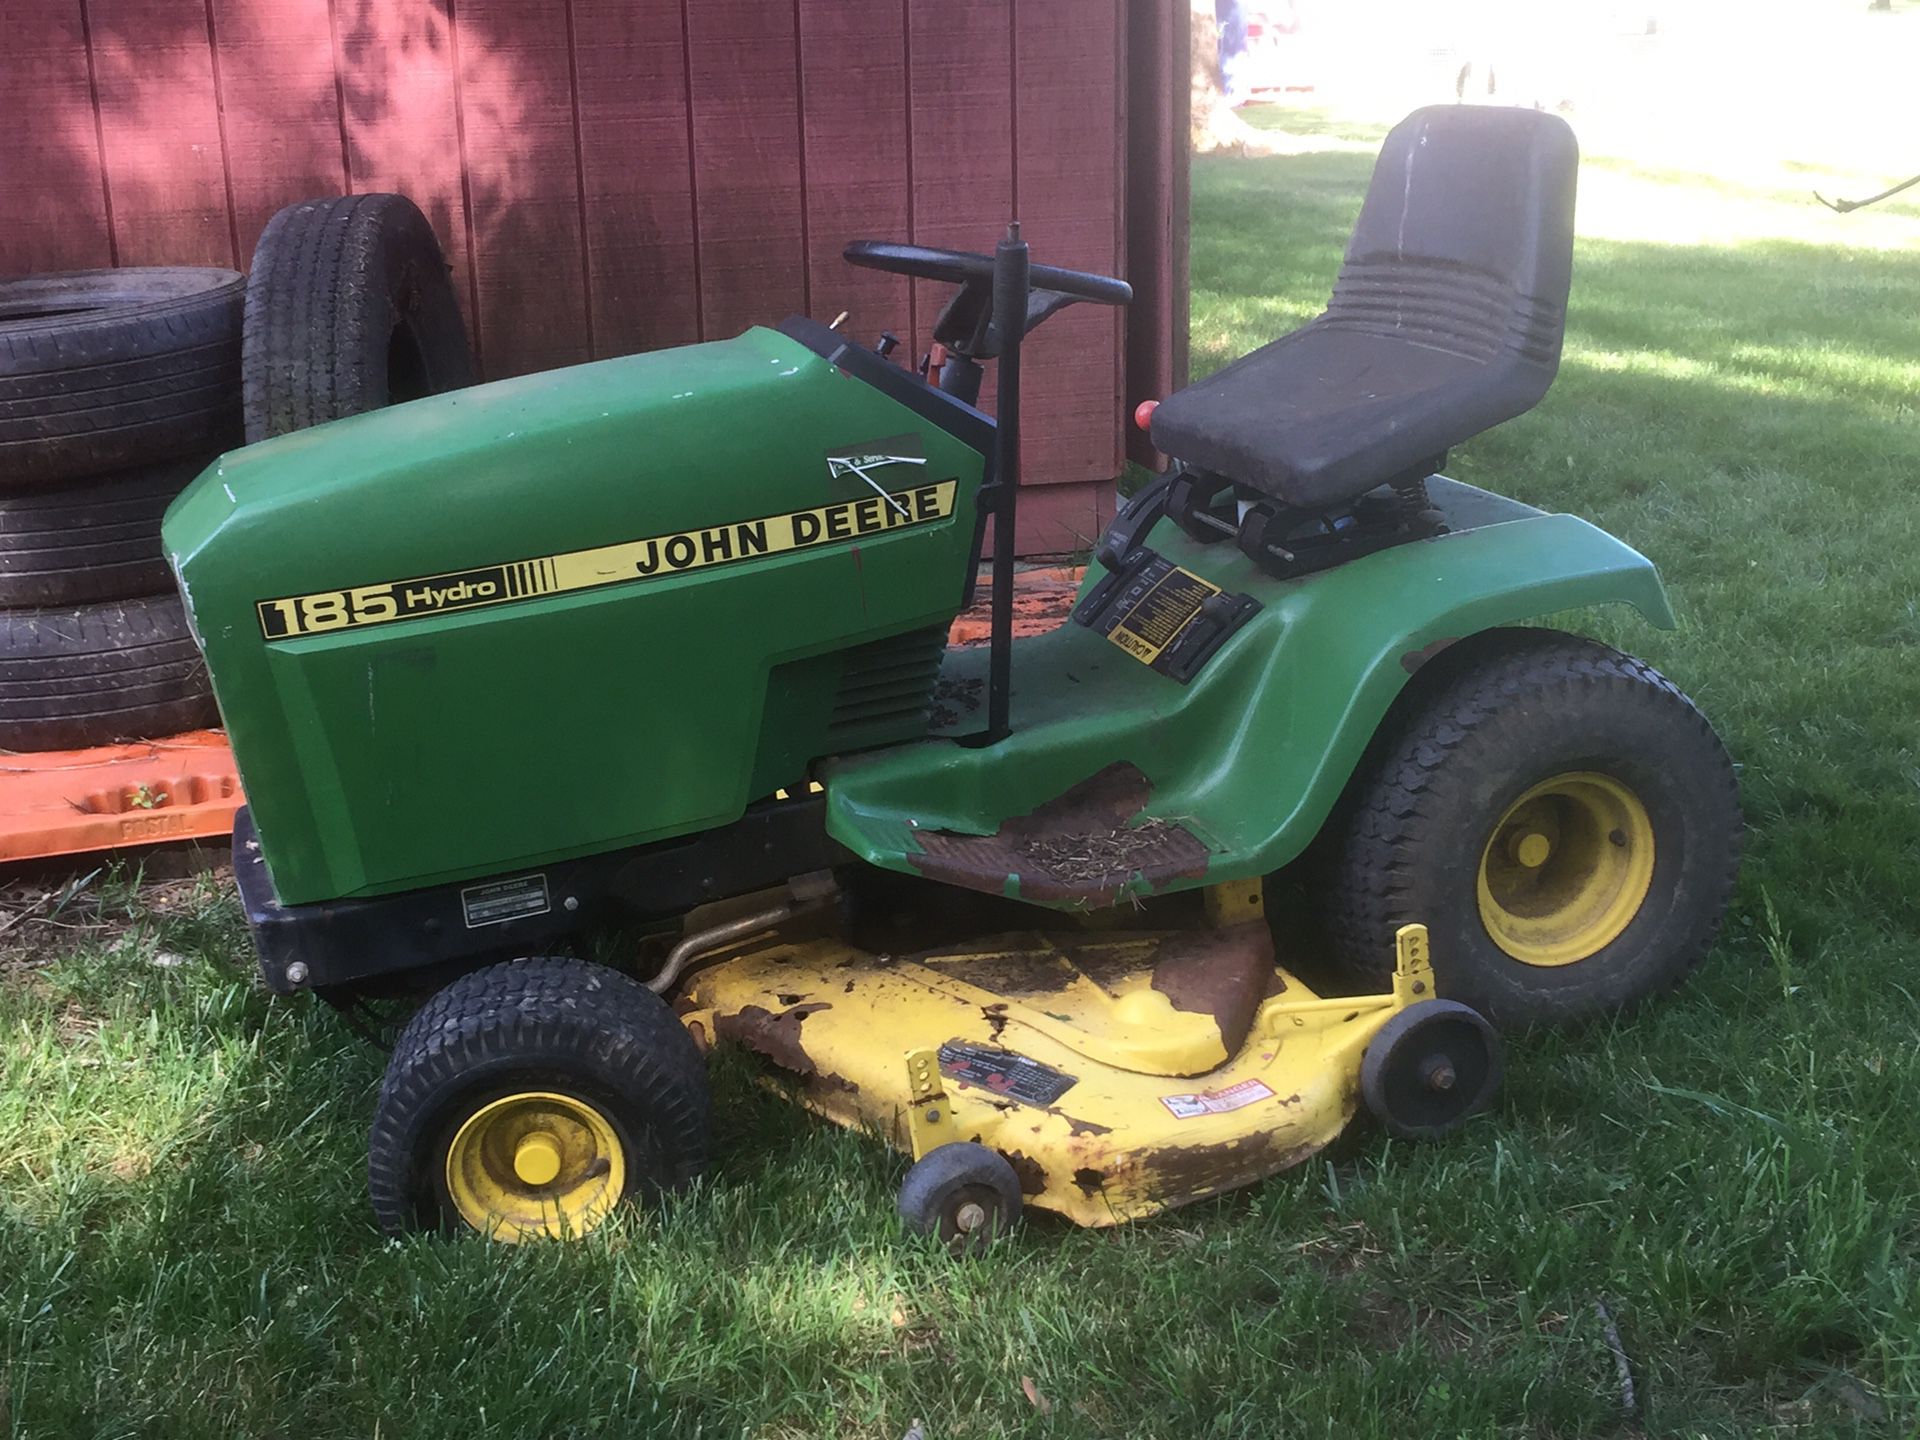 John Deere 185 works excellent only need to put new belt of cutter , include new belt with it